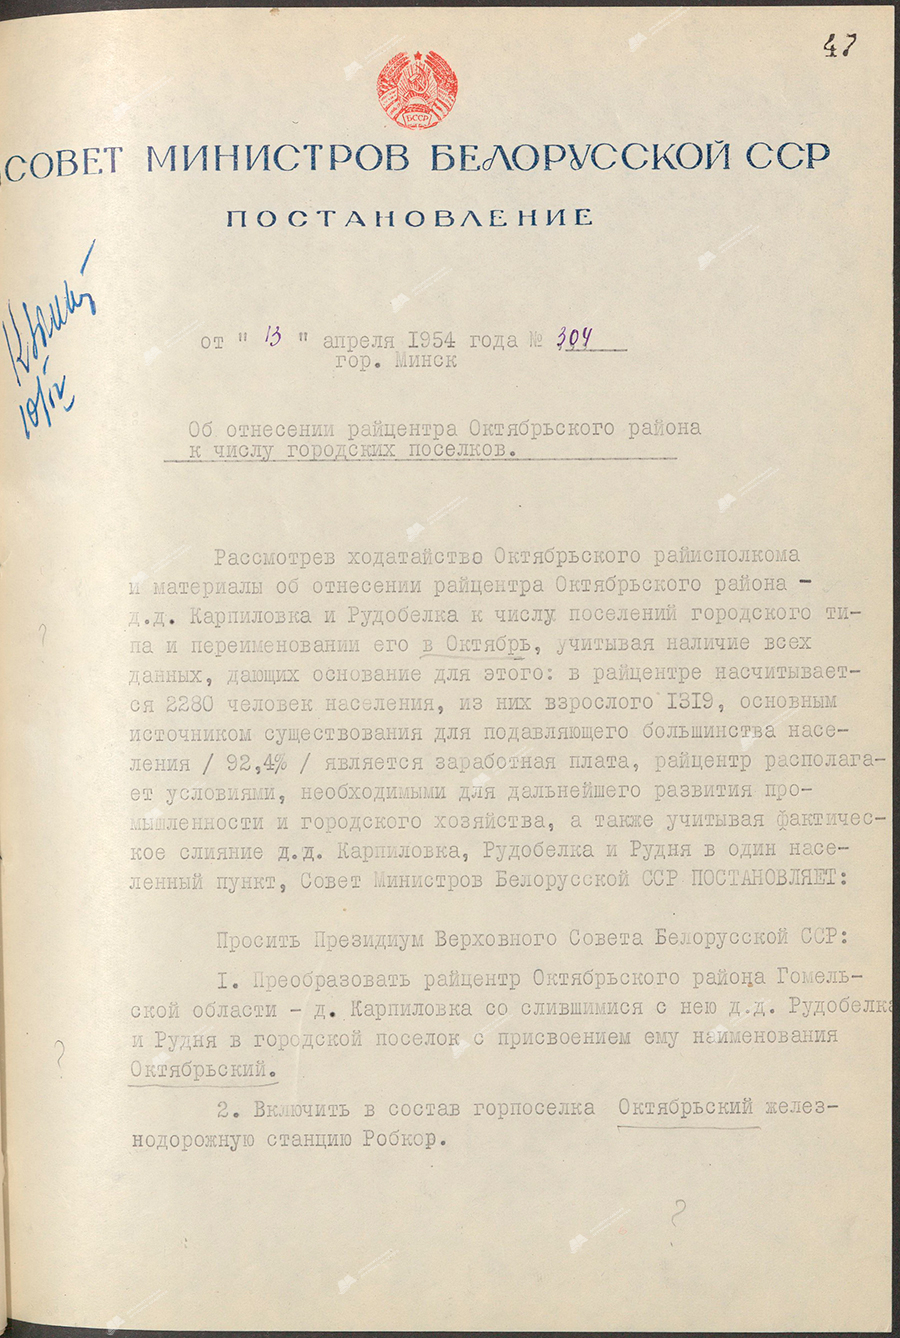 Resolution No. 304 of the Council of Ministers of the Byelorussian SSR «On classifying the regional center of the Oktyabrsky district as an urban settlement»-с. 0